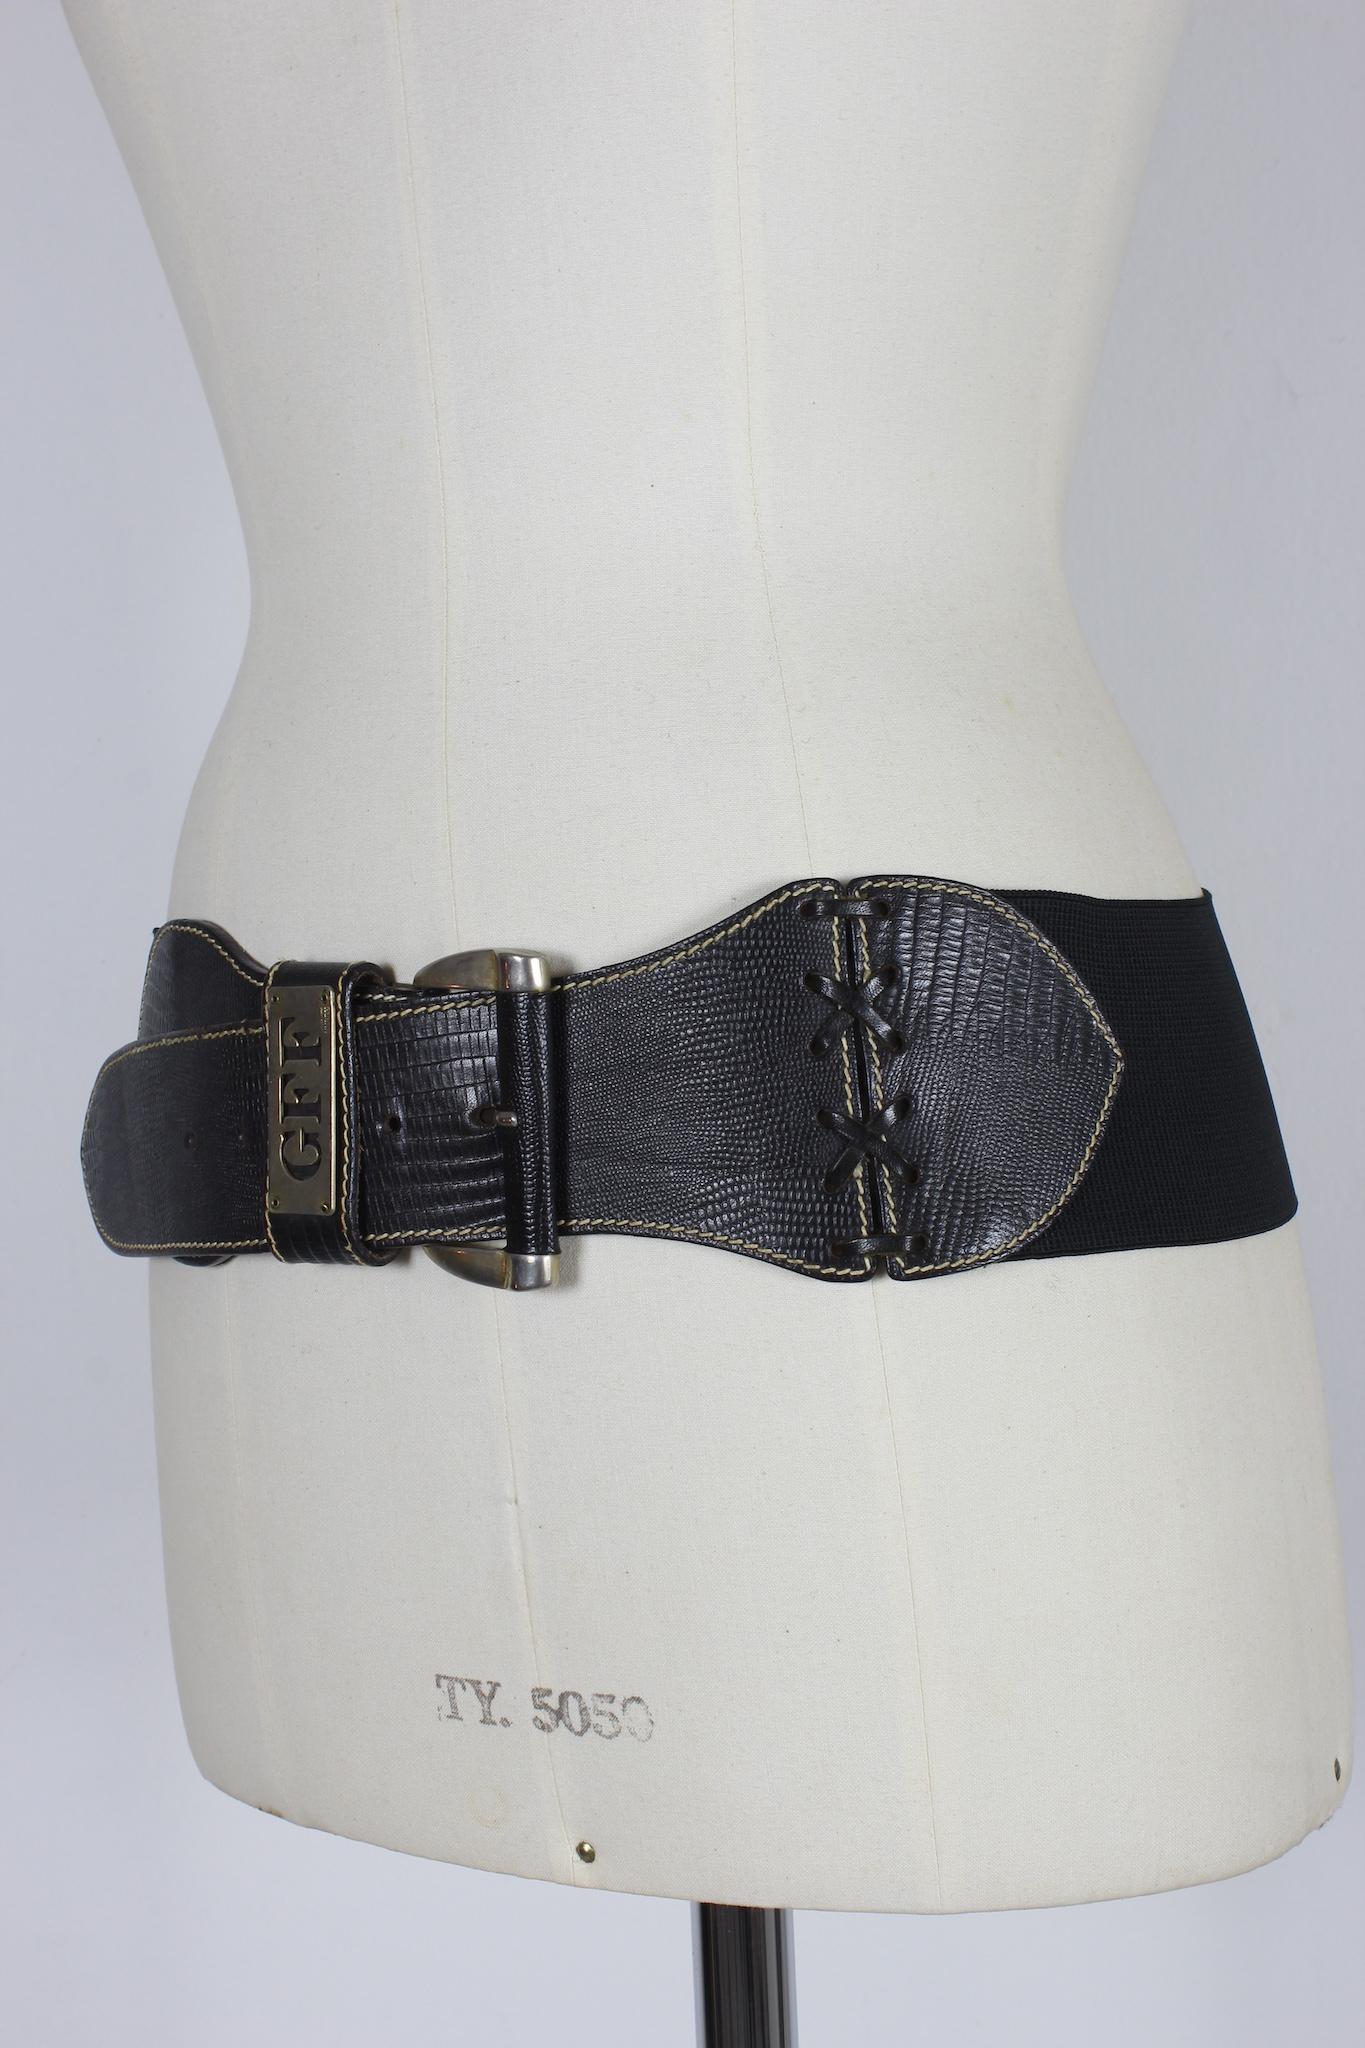 Gianfranco Ferre vintage 90s belt. Black colour, elastic fabric with part of the closure in leather. Made in Italy.

Length: 97 cm
Width: 8 cm